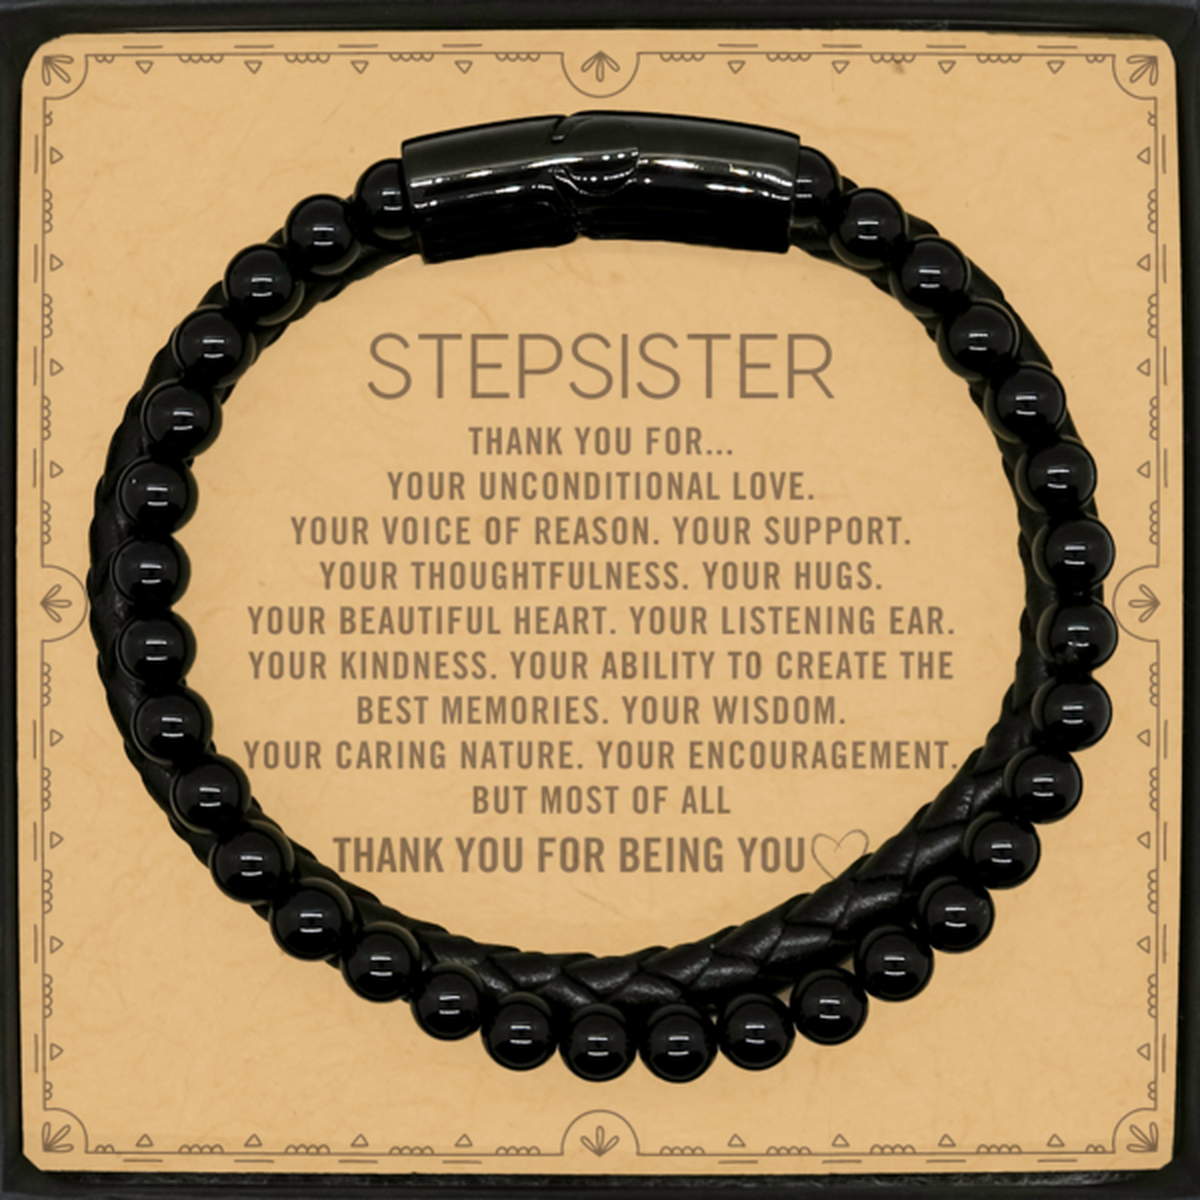 Stepsister Stone Leather Bracelets Custom, Message Card Gifts For Stepsister Christmas Graduation Birthday Gifts for Men Women Stepsister Thank you for Your unconditional love